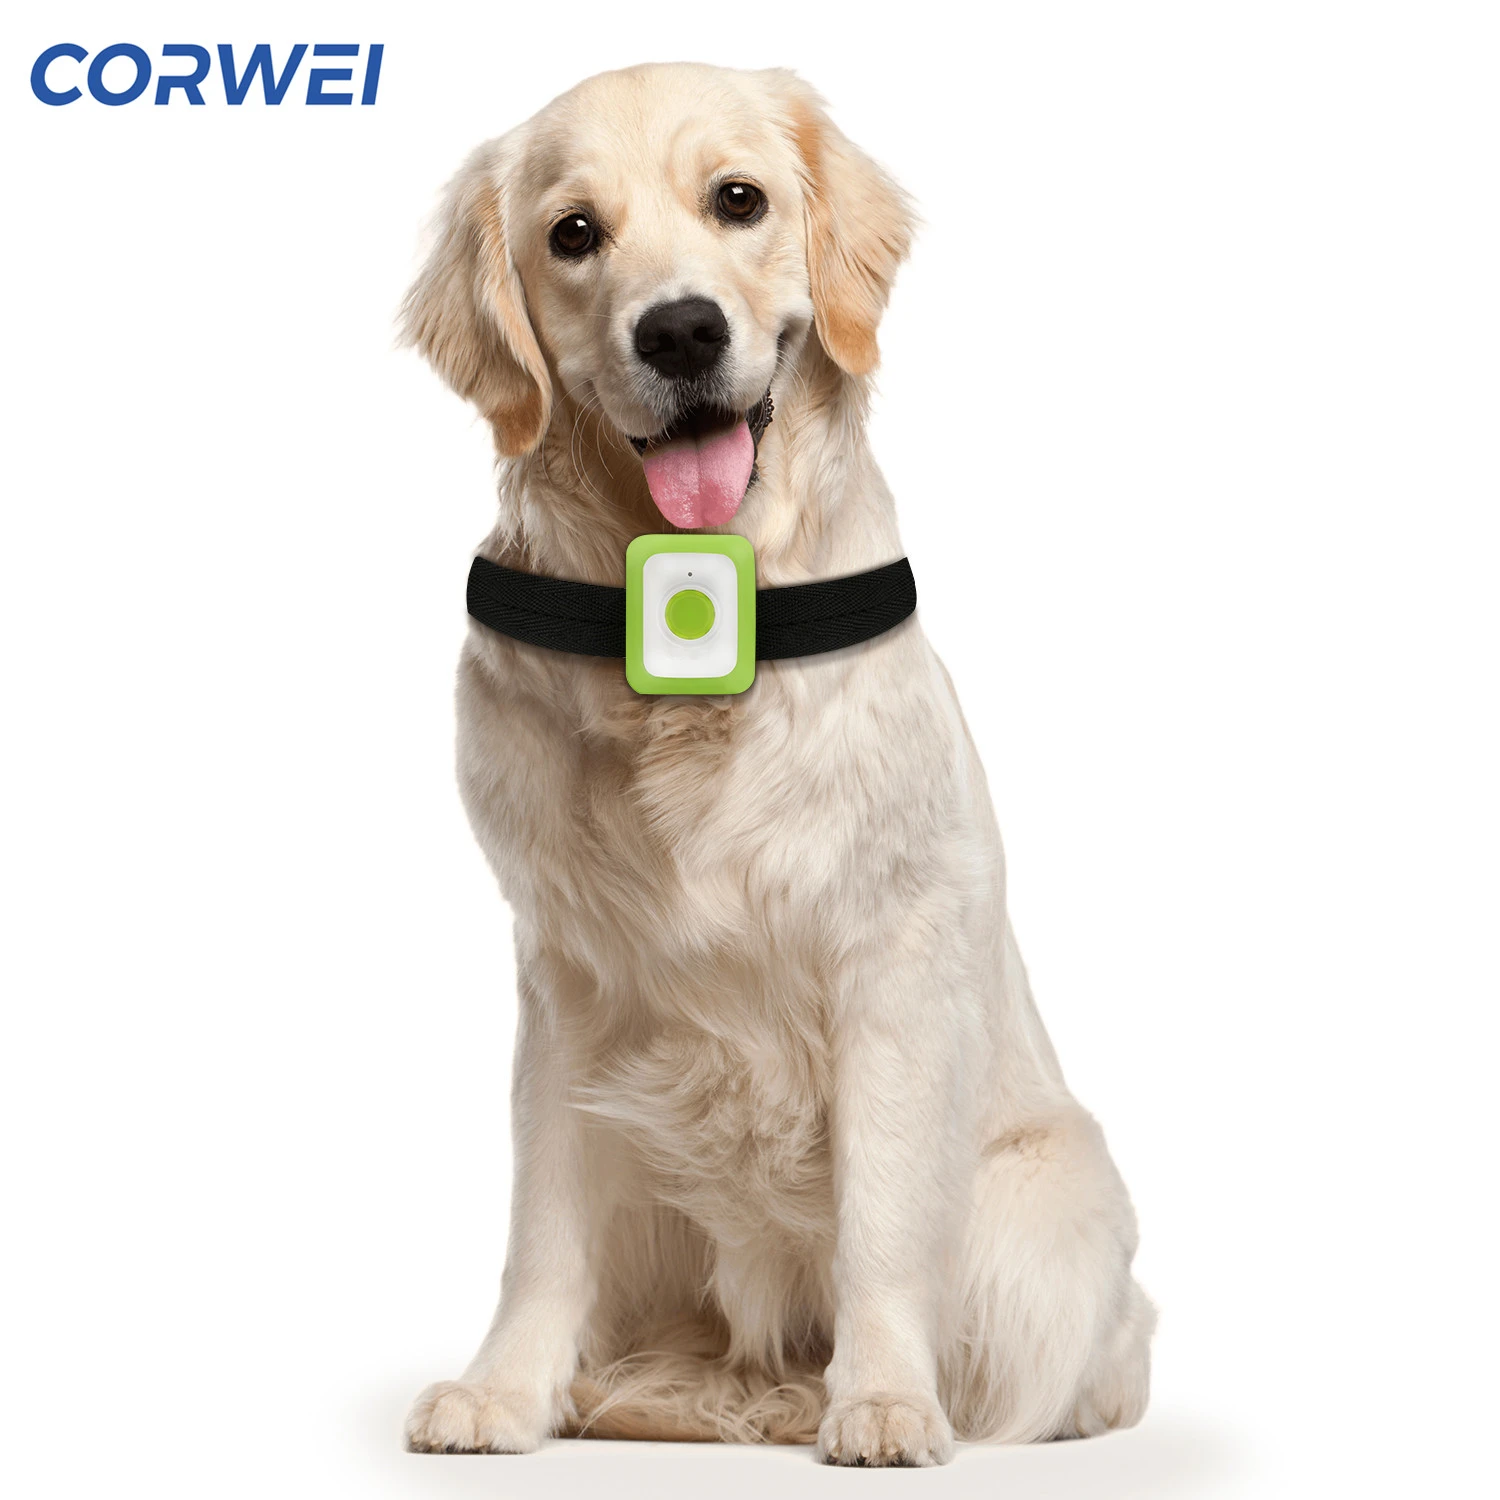 Corwei CW18 4G cat-m1 NB-IoT personal elders trakers gps tracker for dogs and cats with built-in battery